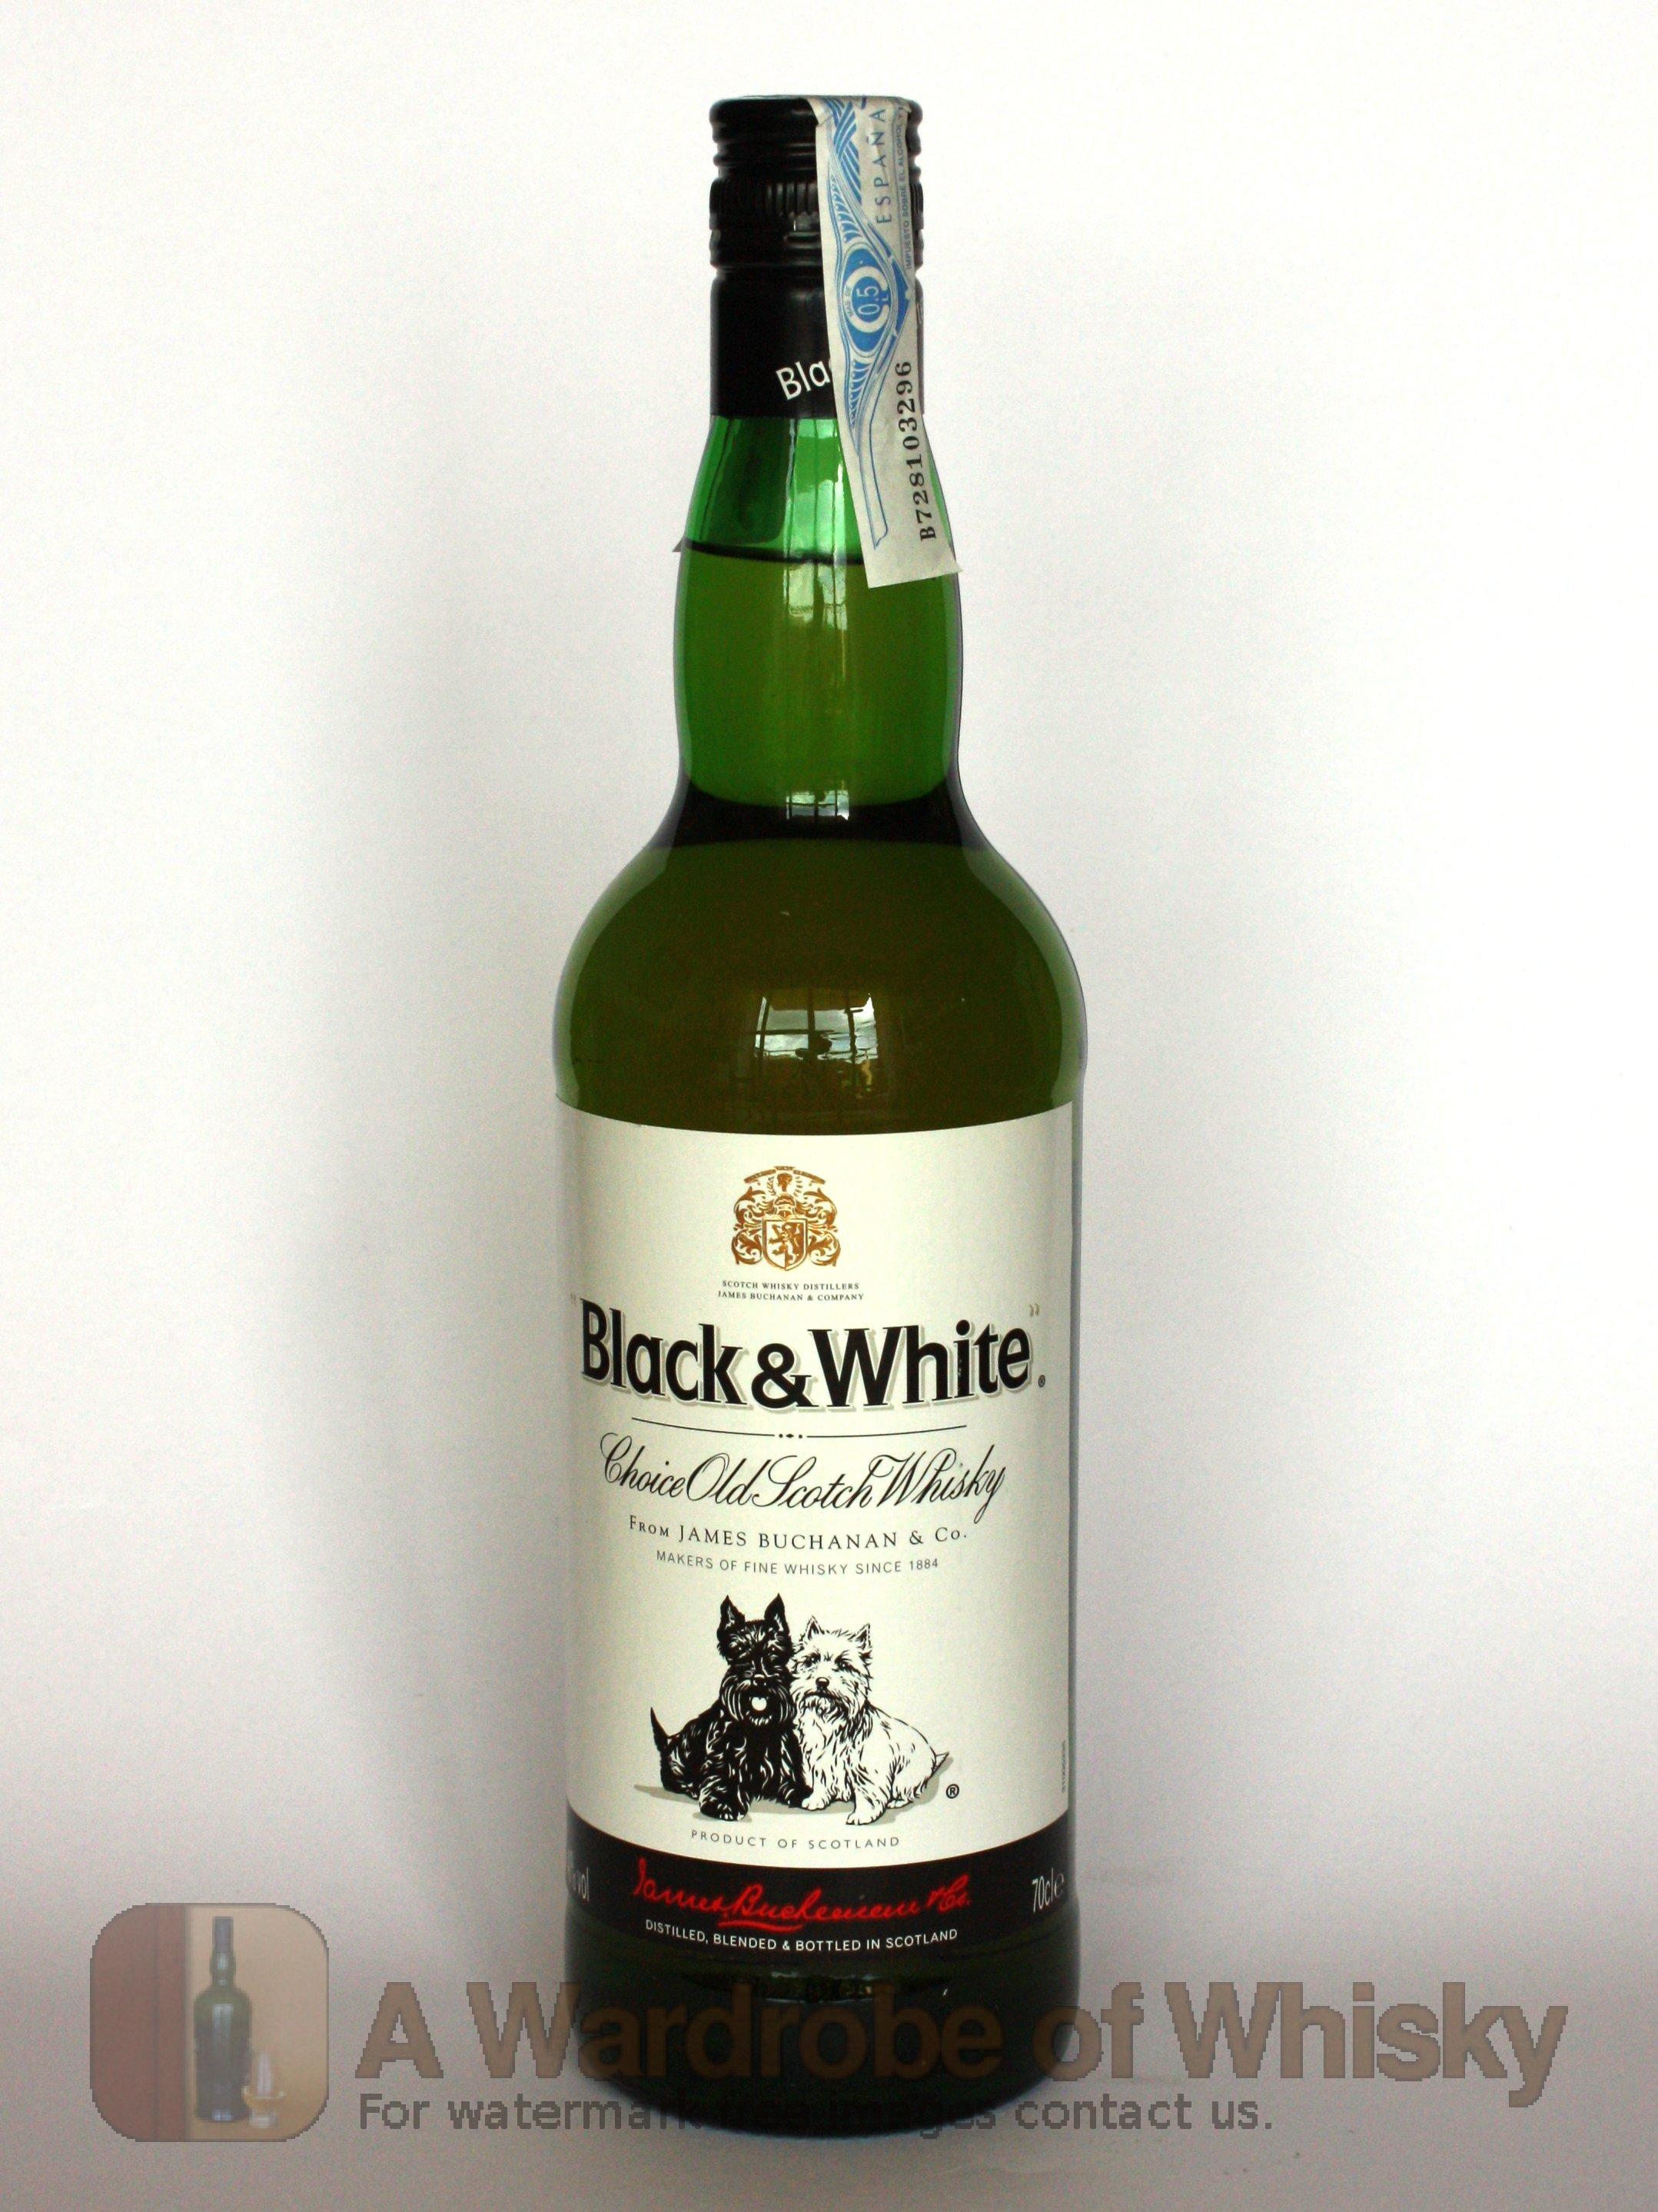 Buy Black and White Choice Old Scotch Whisky Blended